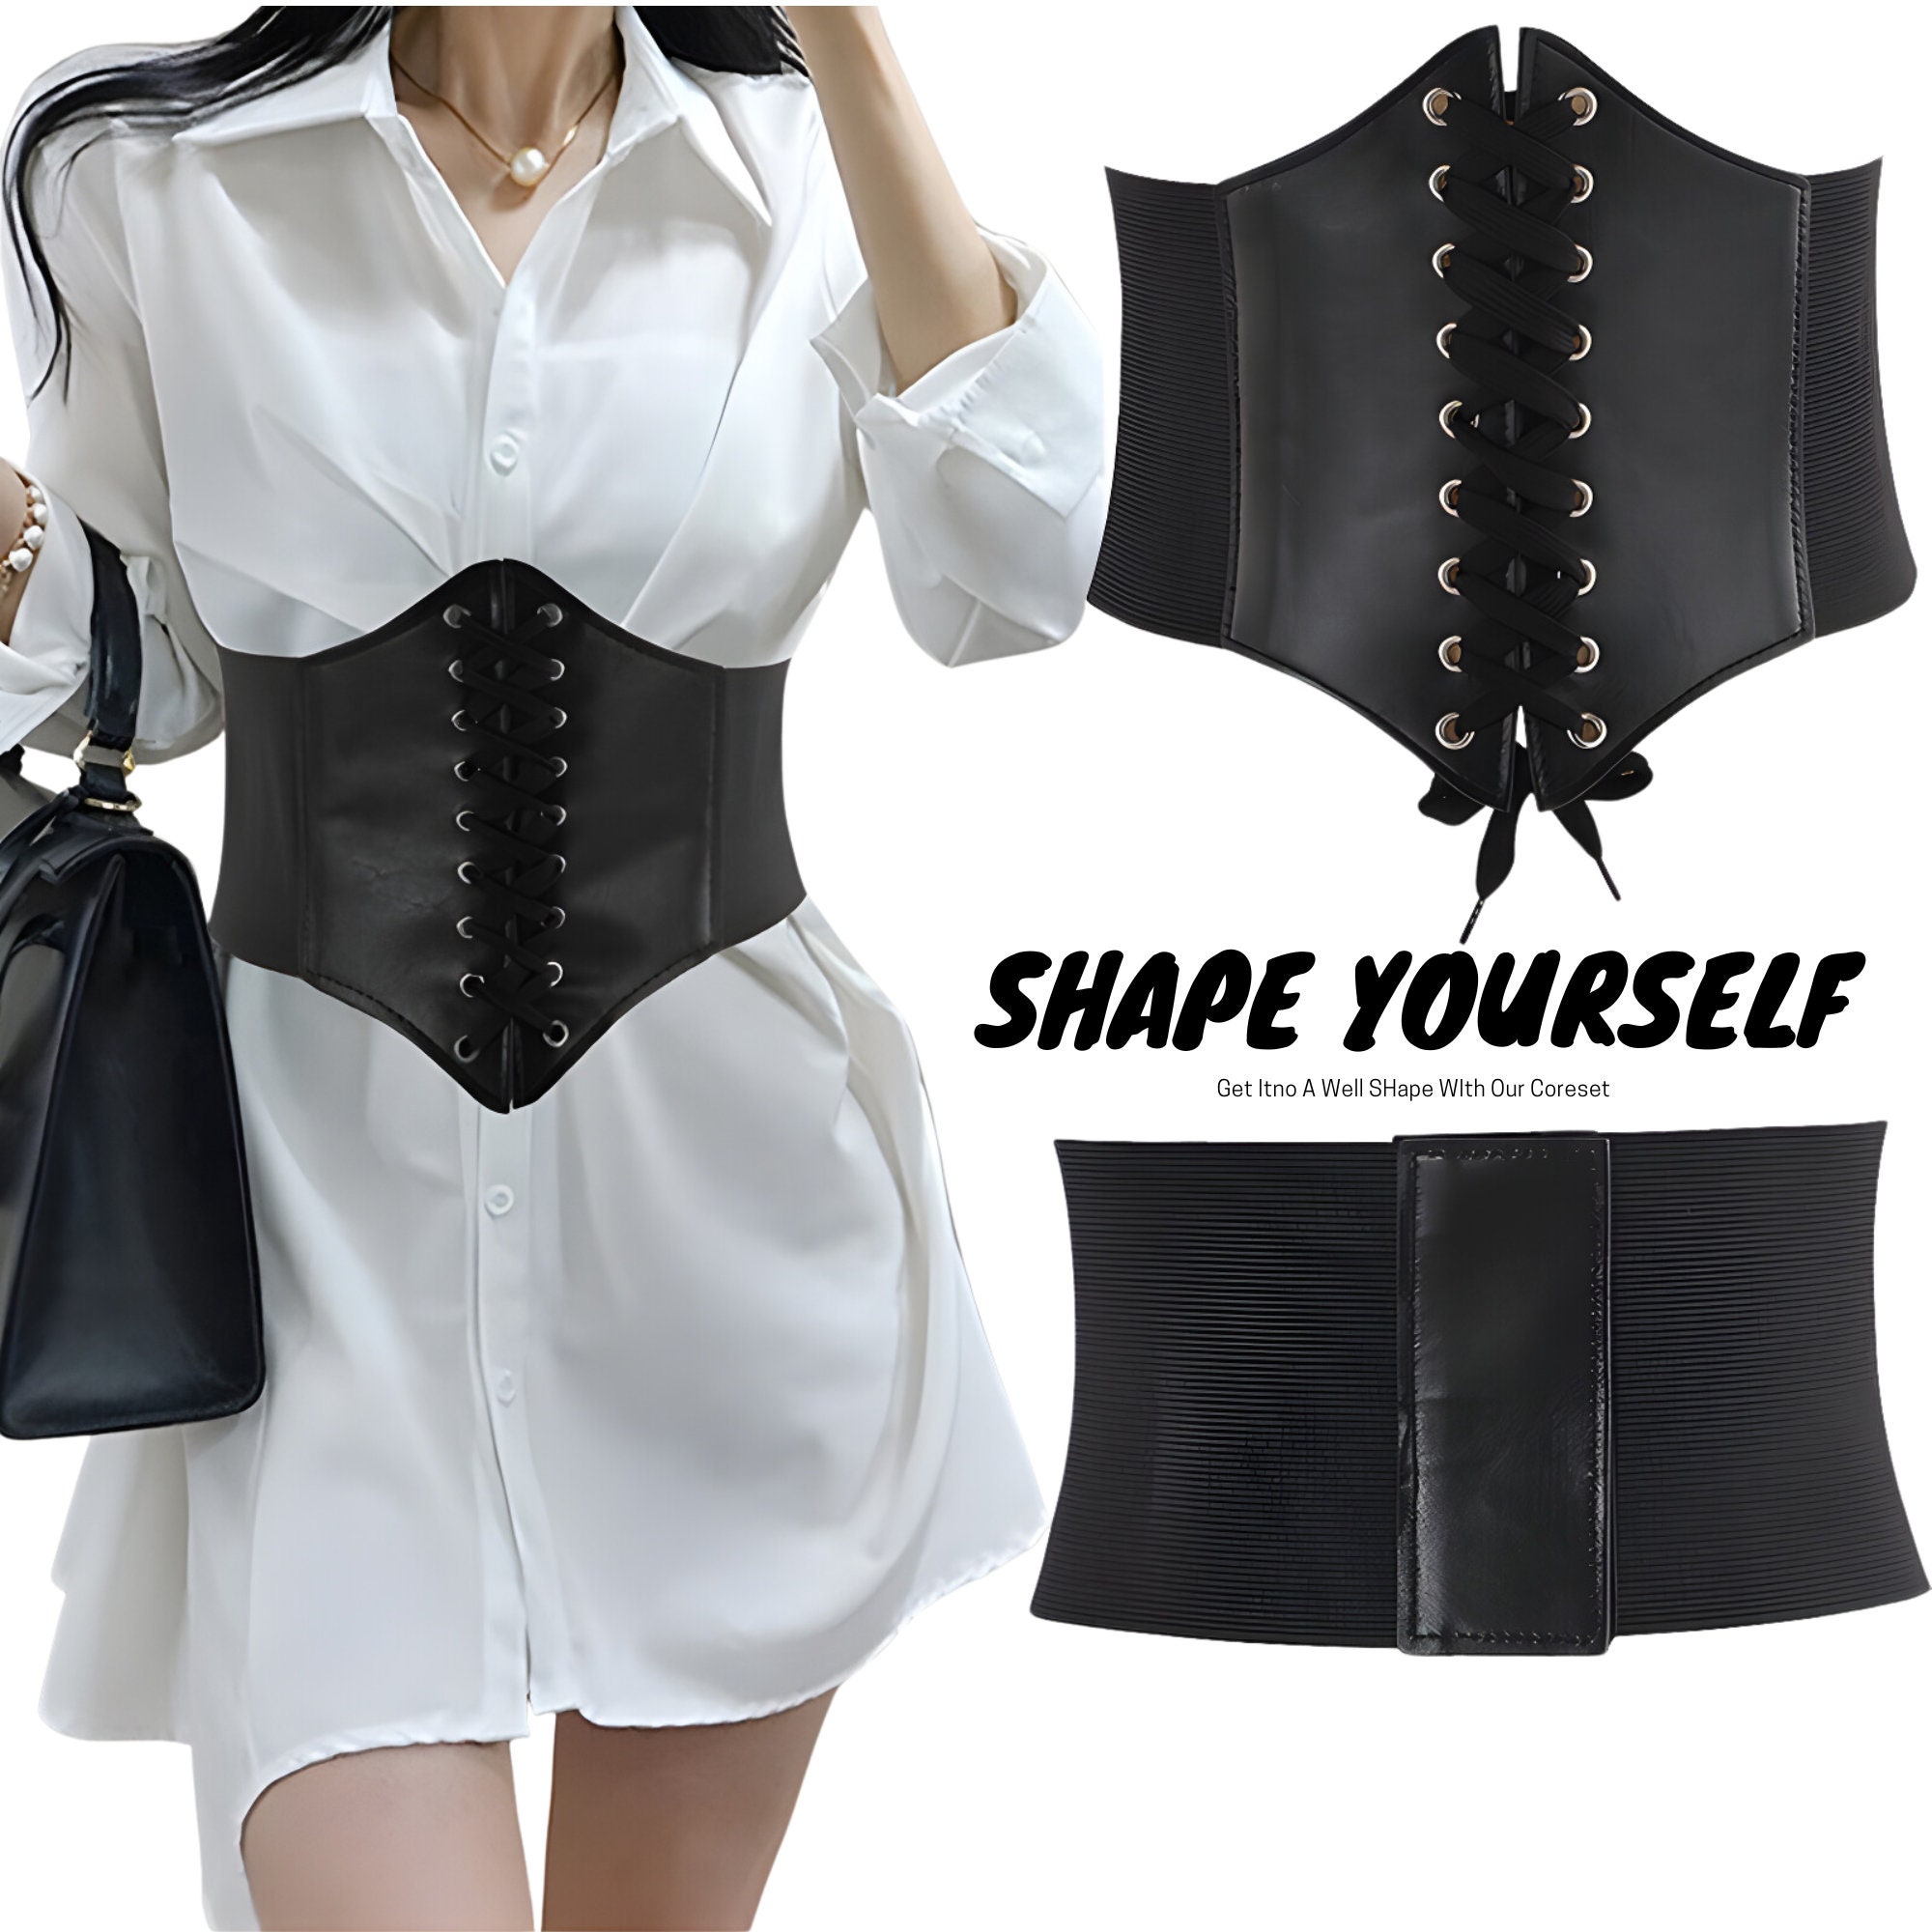 Find Cheap, Fashionable and Slimming full body leather corset